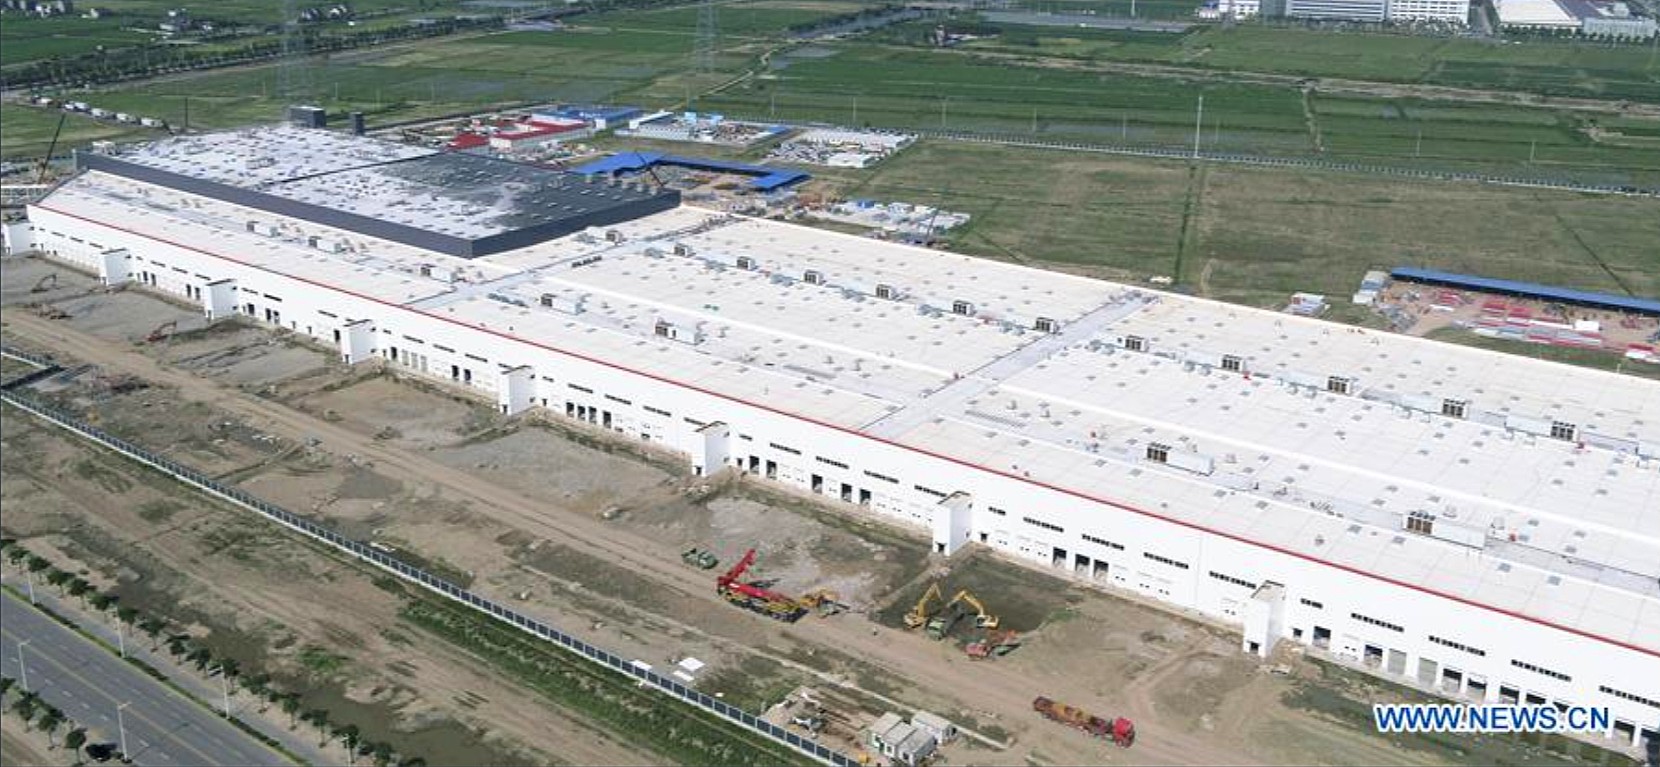 Tesla Gigafactory 3 obtains vital certificate after completing inspection in record time